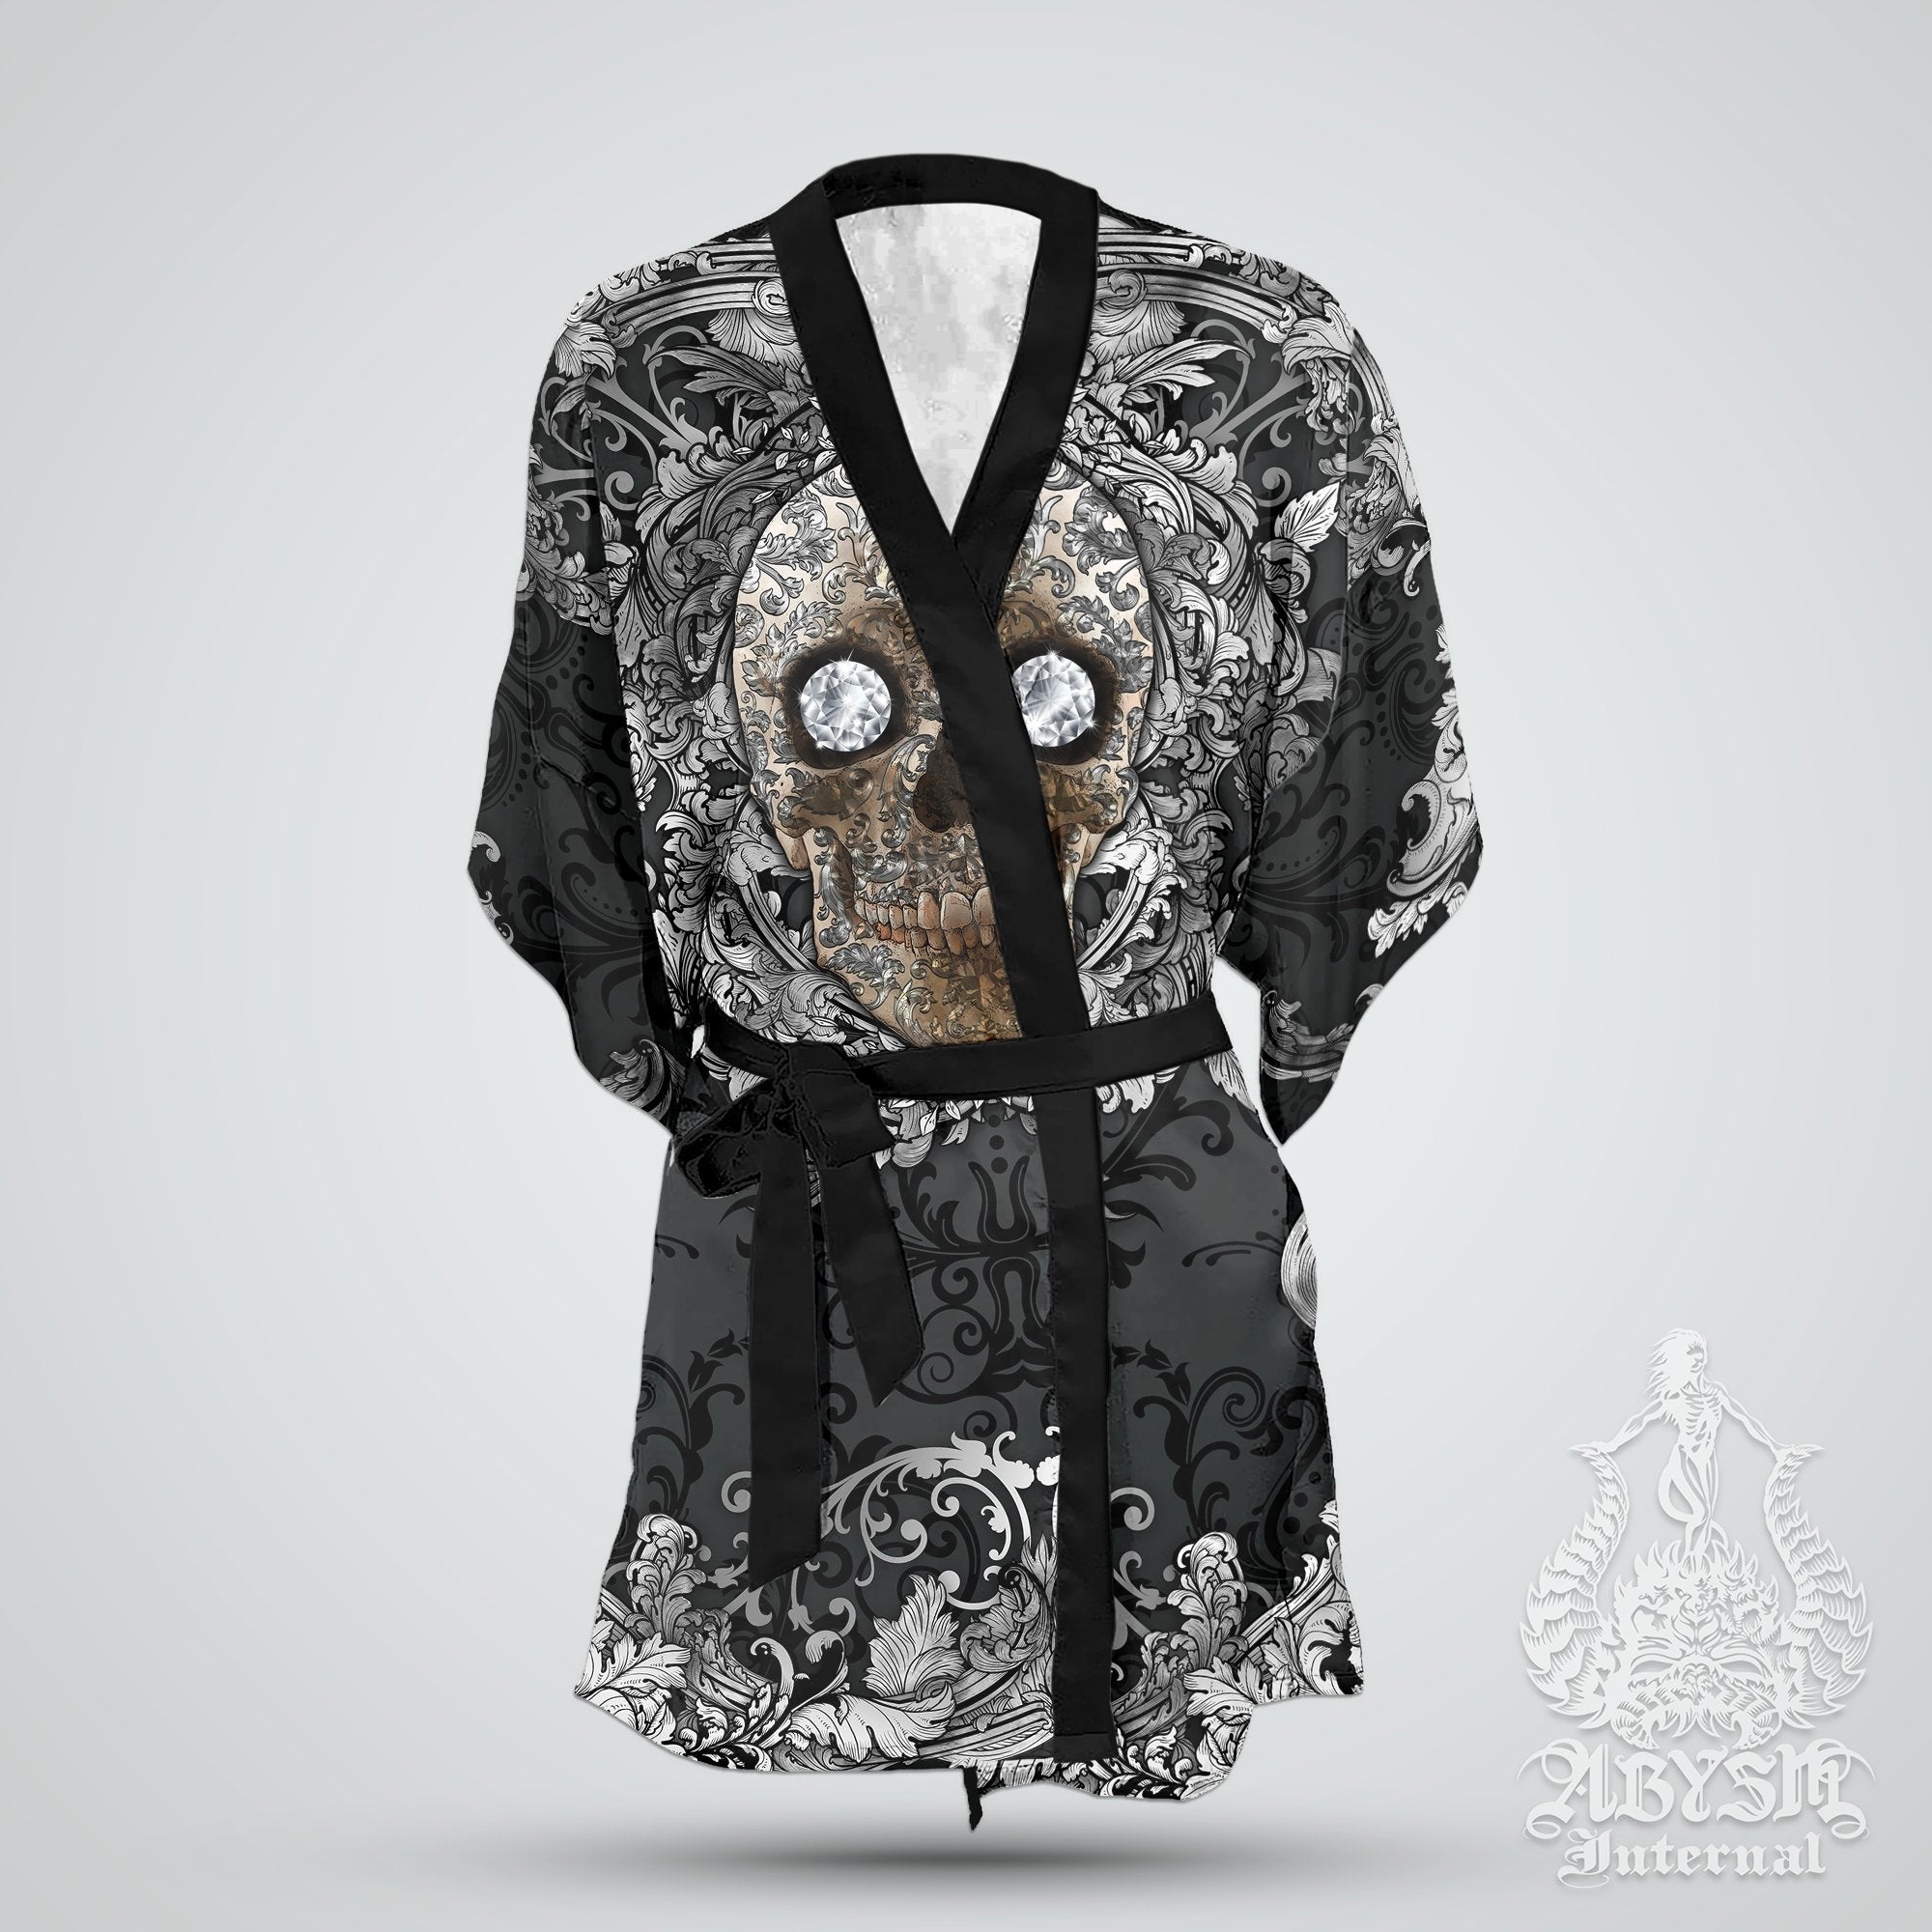 Skull Cover Up, Beach Outfit, Party Kimono, Summer Festival Robe, Gothic Indie and Alternative Clothing, Unisex - Silver Black - Abysm Internal